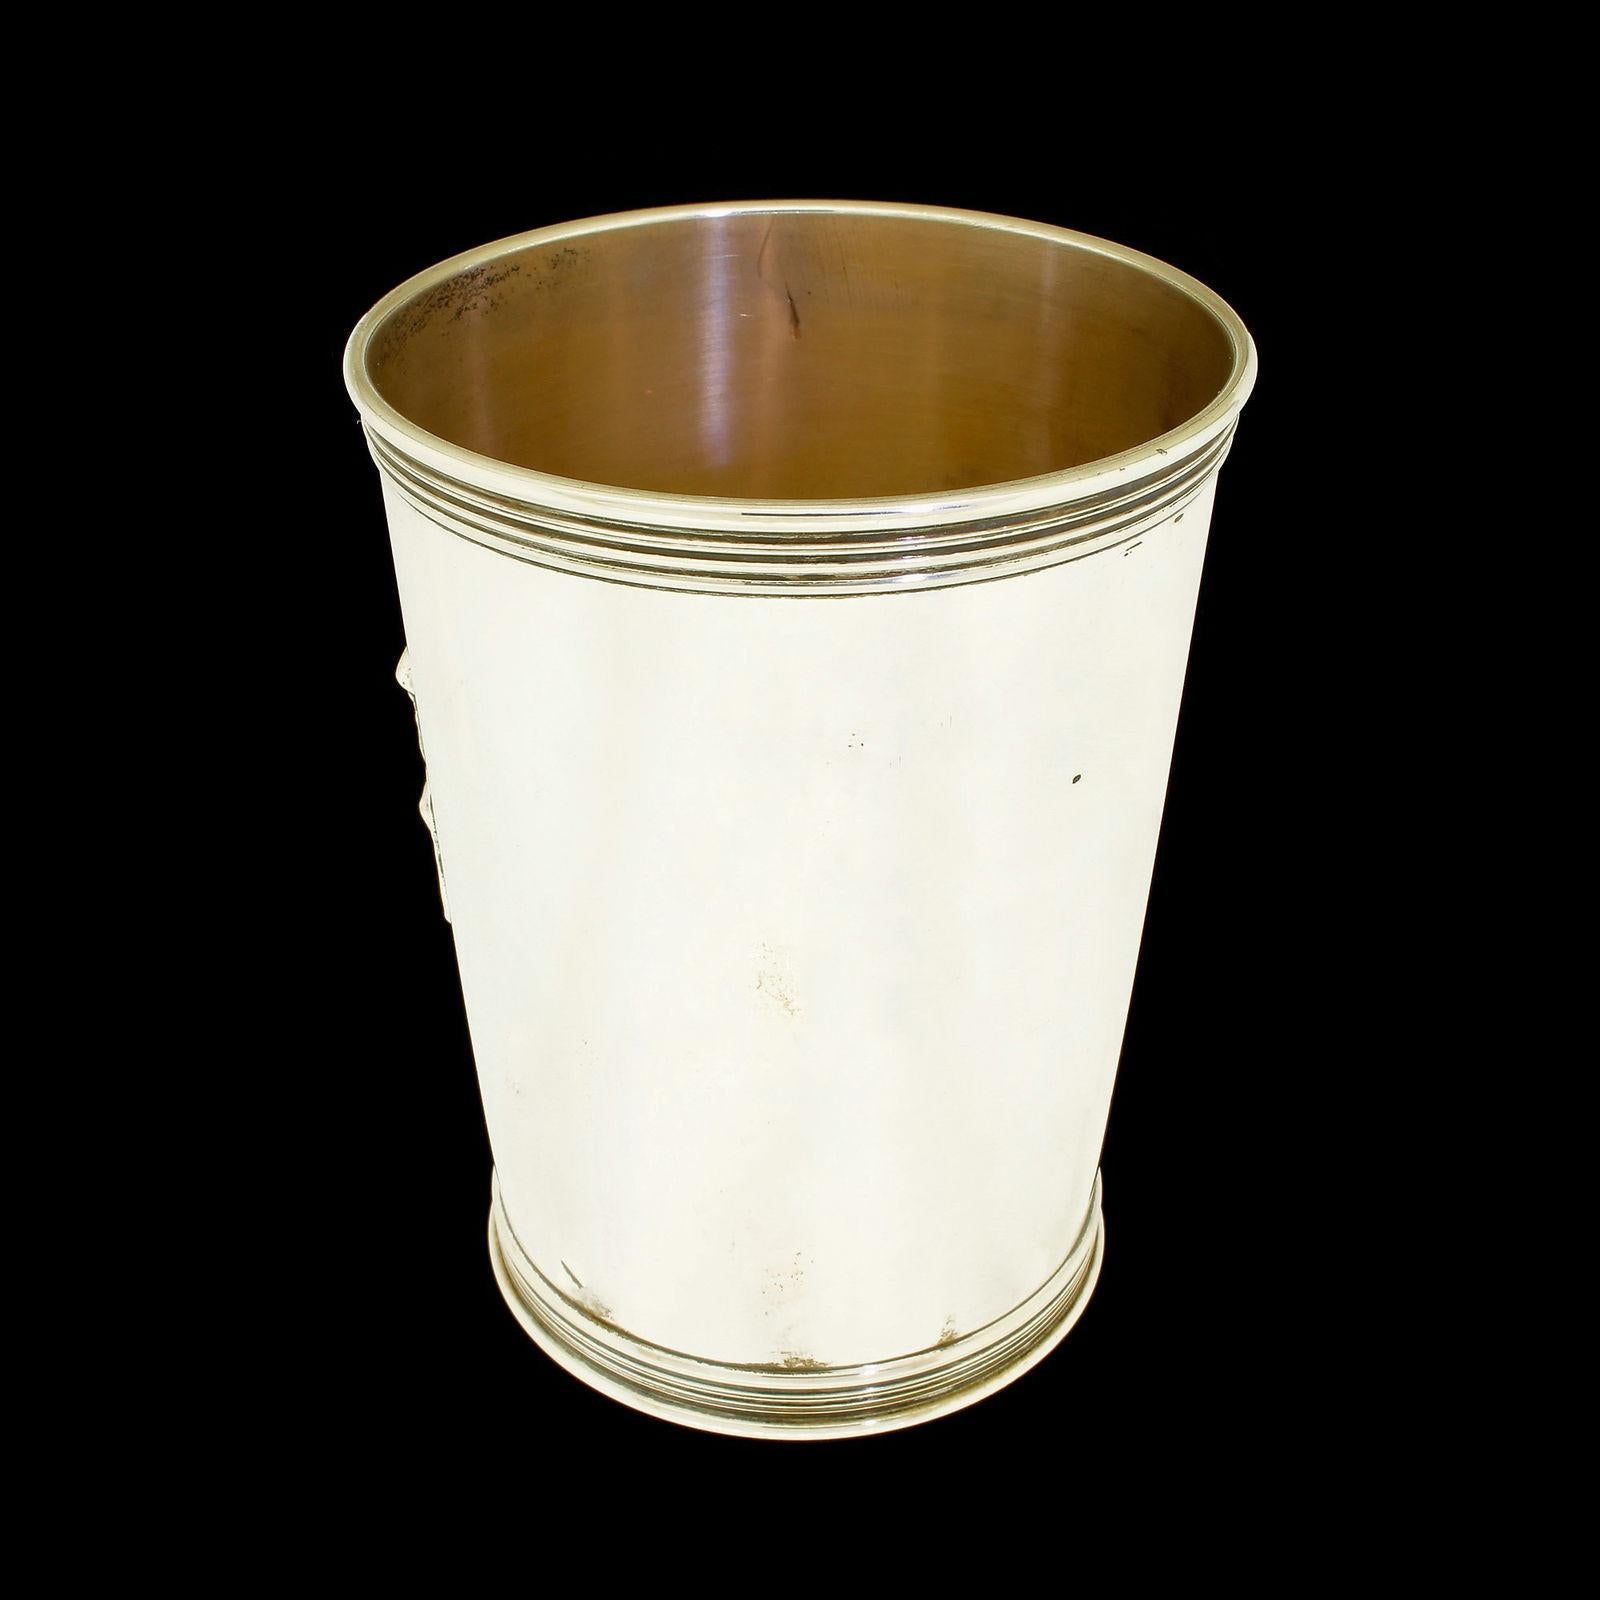 Beautiful vintage sterling silver Mint Julep cup made by Benjamin Trees of KY and retailed by S Penn & Son's.
One owner, no monograms either applied or removed and these have been stored for many years.
The cup was purchased in the late 1950's and